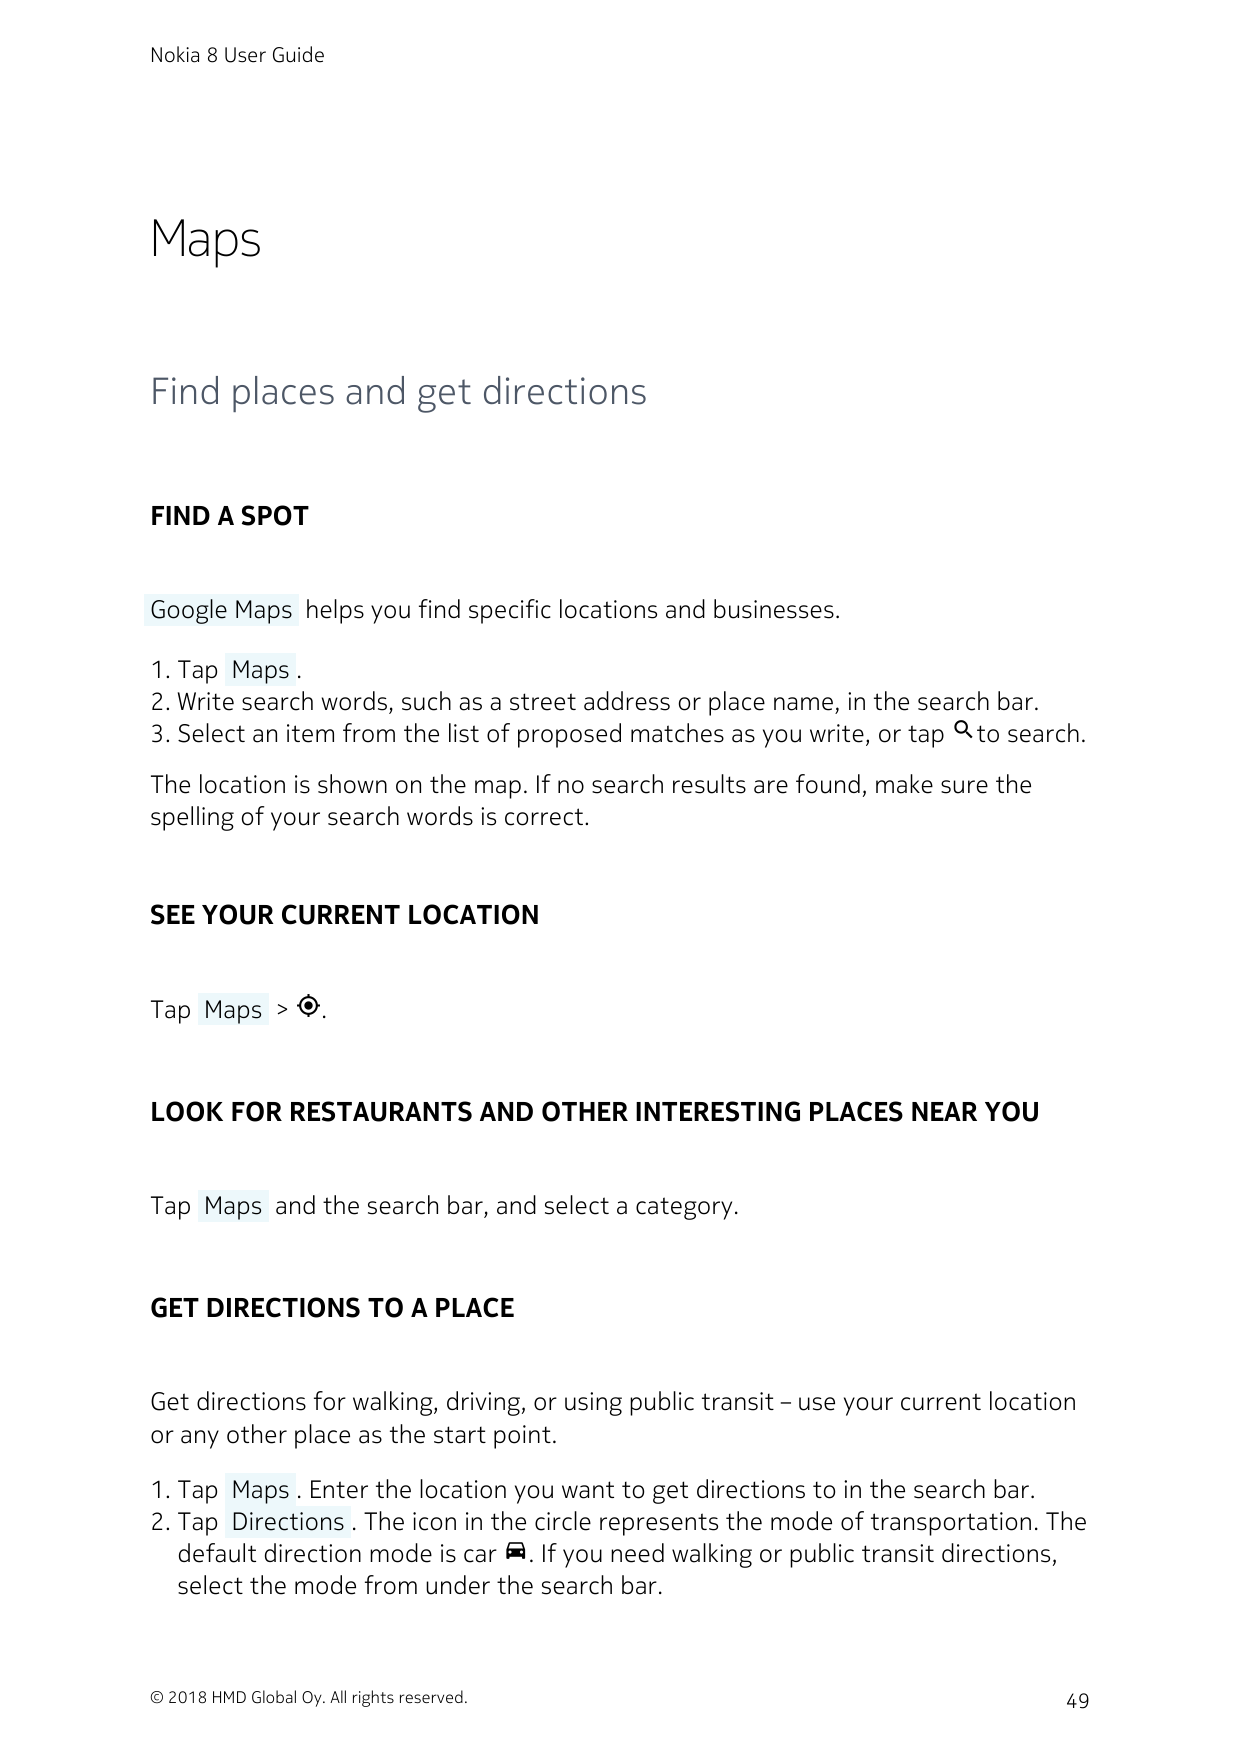 Nokia 8 User GuideMapsFind places and get directionsFIND A SPOT Google Maps  helps you find specific locations and businesses.1.